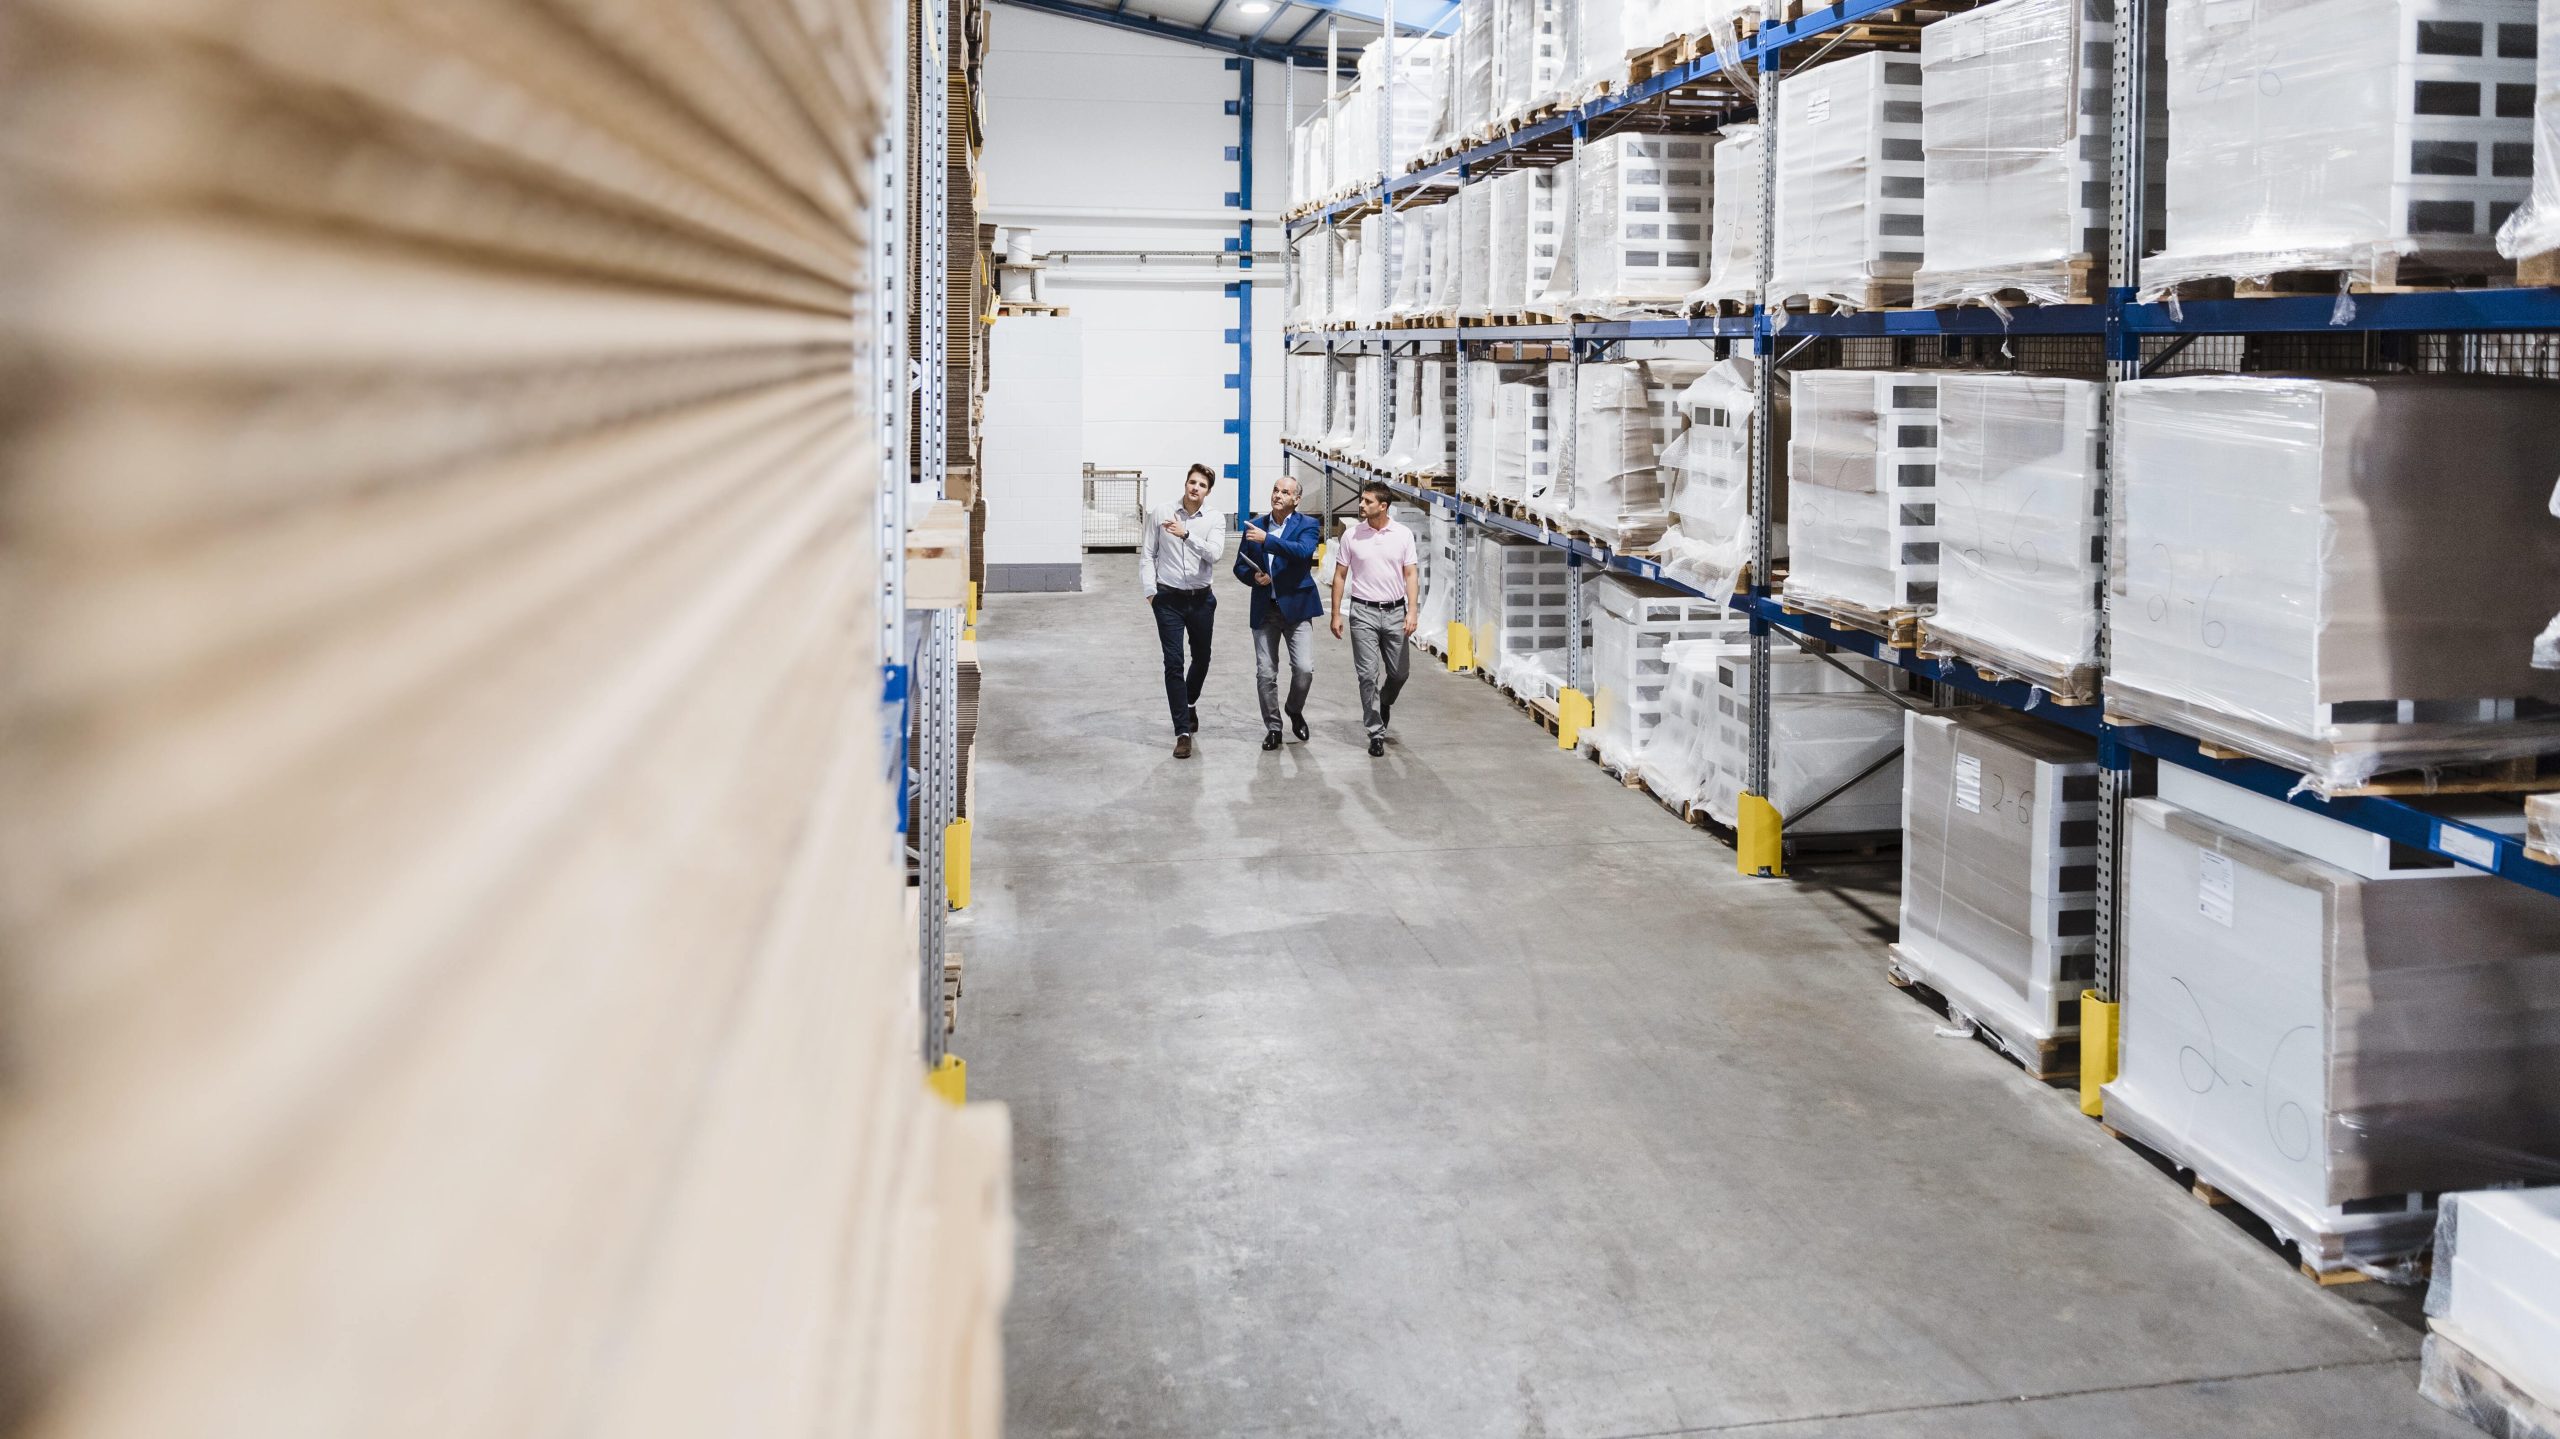 Warehouse employees conducting an inspection in a well-organized storage facility in the US, showcasing Stellar Logistix's warehousing solutions.